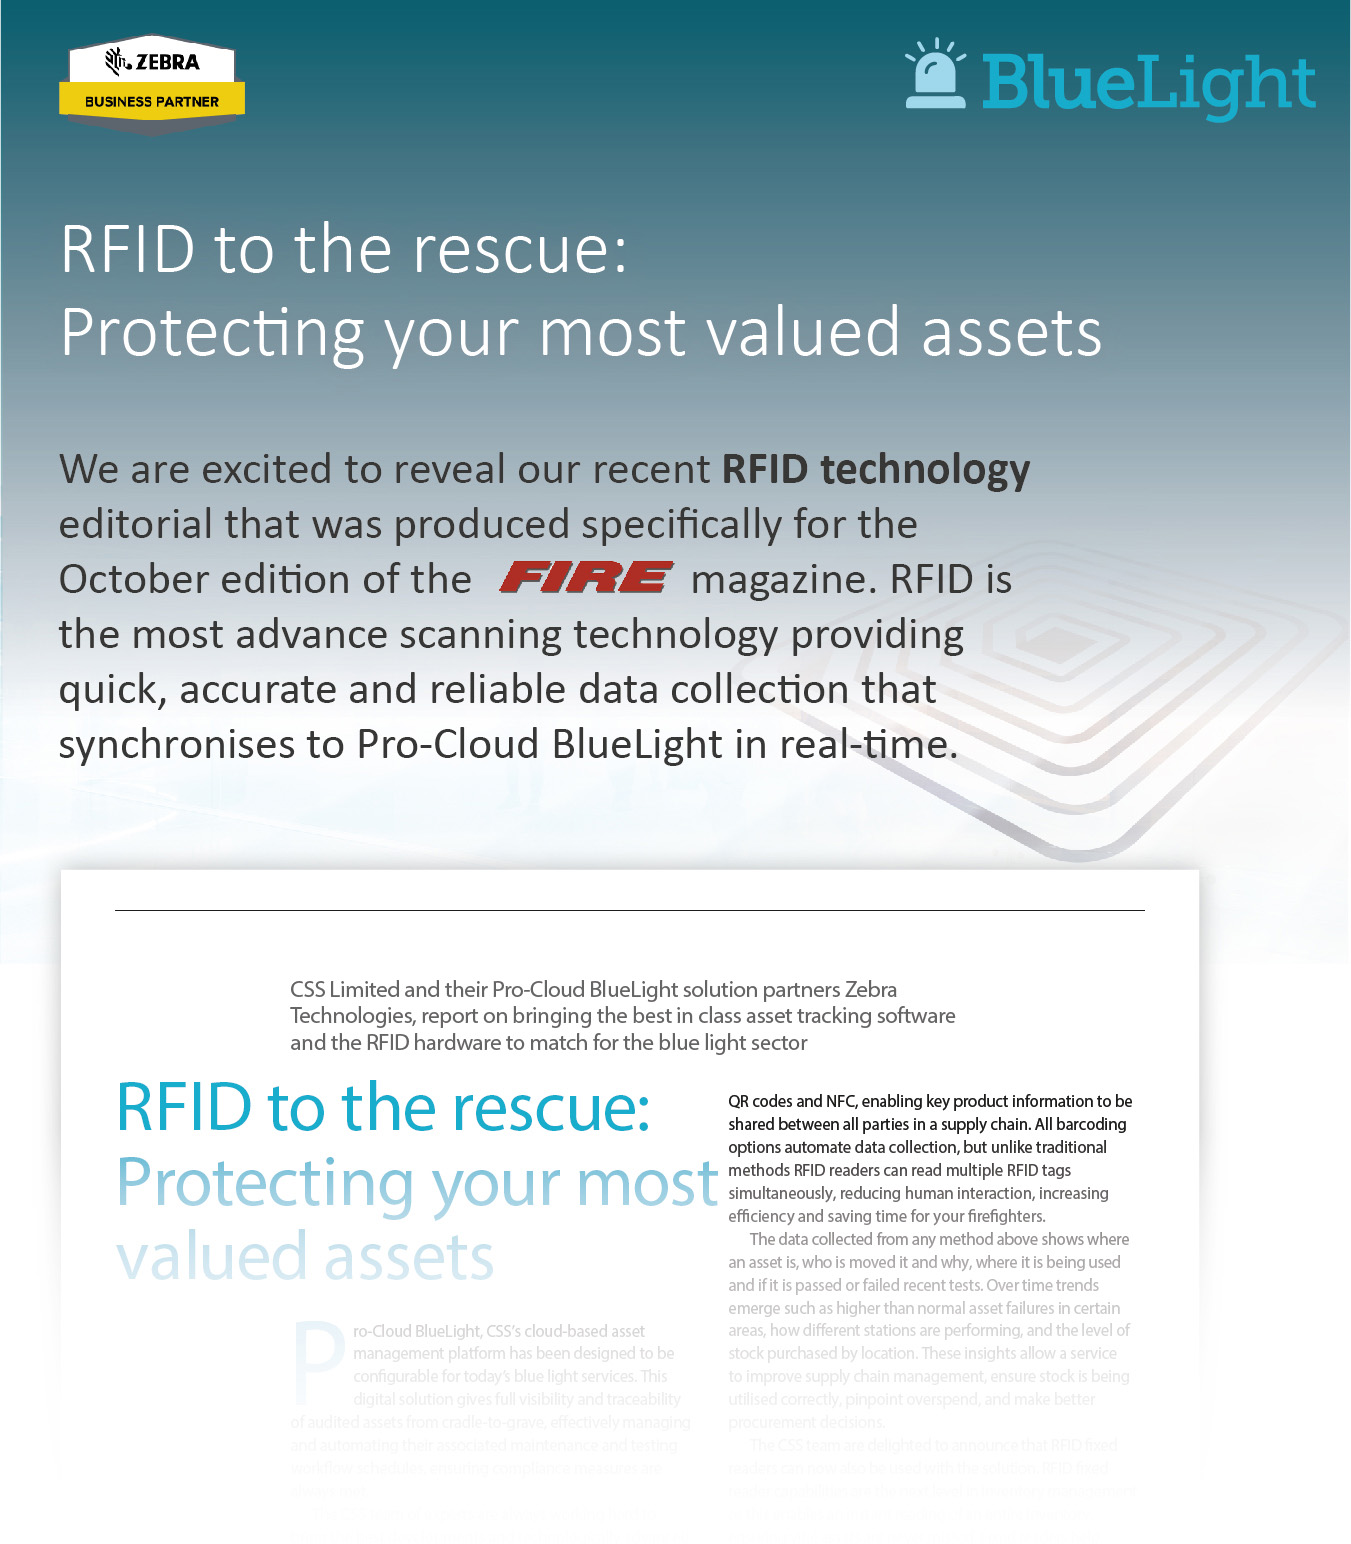 We are excited to reveal our recent RFID technology editorial that was produced specifically for the October edition of the FIRE magazine. RFID is the most advanced scanning technology providing quick, accurate and reliable data collection that synchronises to Pro-Cloud BlueLight in real-time. 'CSS Limited and their Pro-Cloud BlueLight solution partners Zebra Technologies, report on bringing the best in class asset tracking software and the RFID hardware to match for the blue light sector. RFID to the rescue: Protecting your most valued assets'